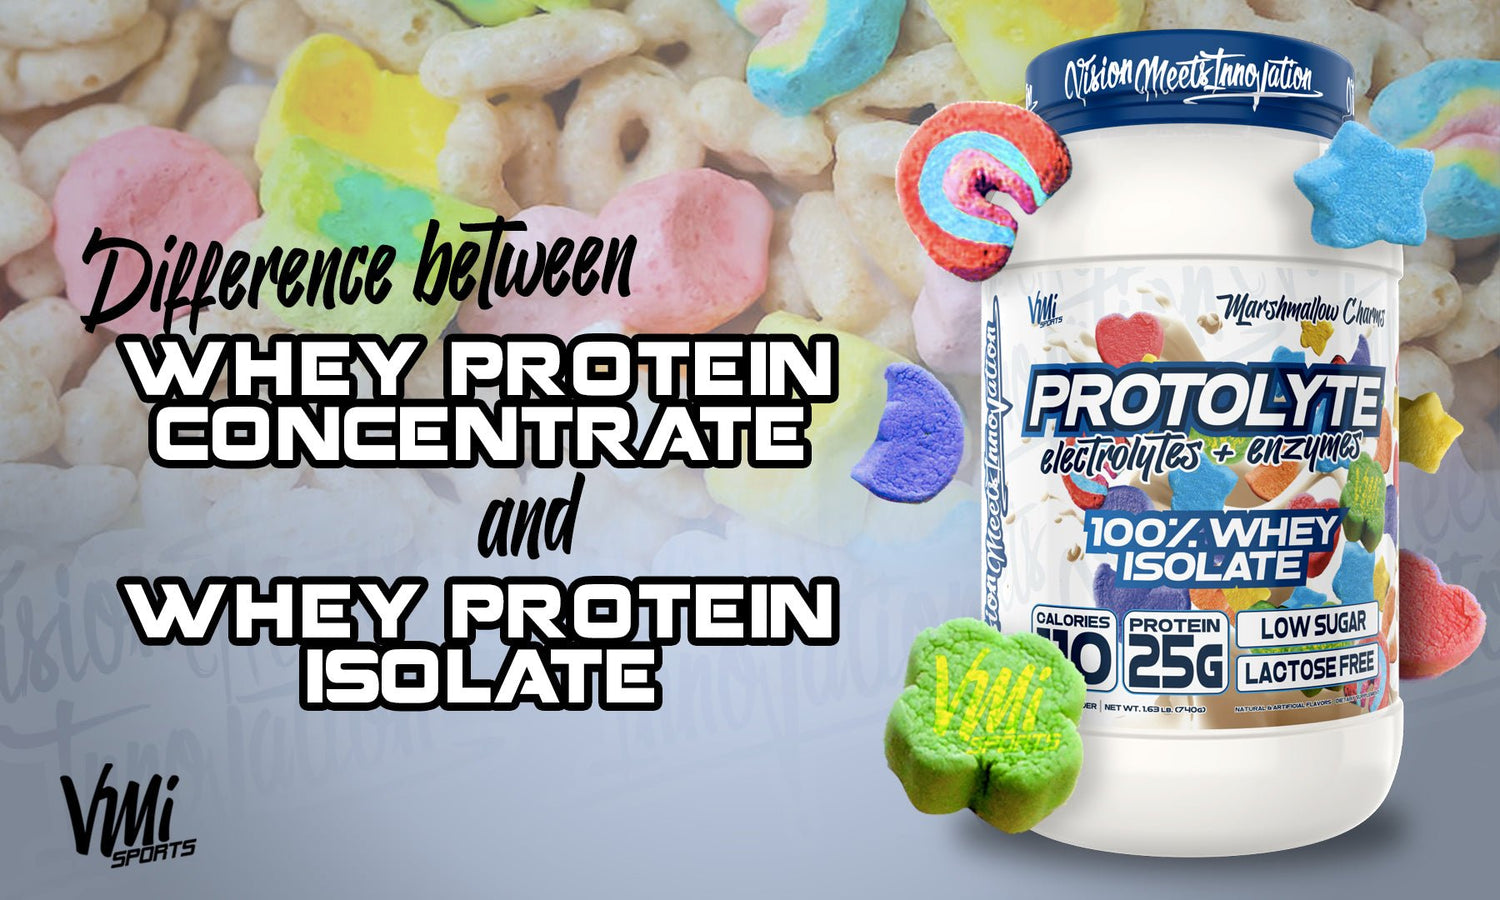 Difference Between Whey Protein Concentrate and Whey Protein Isolate